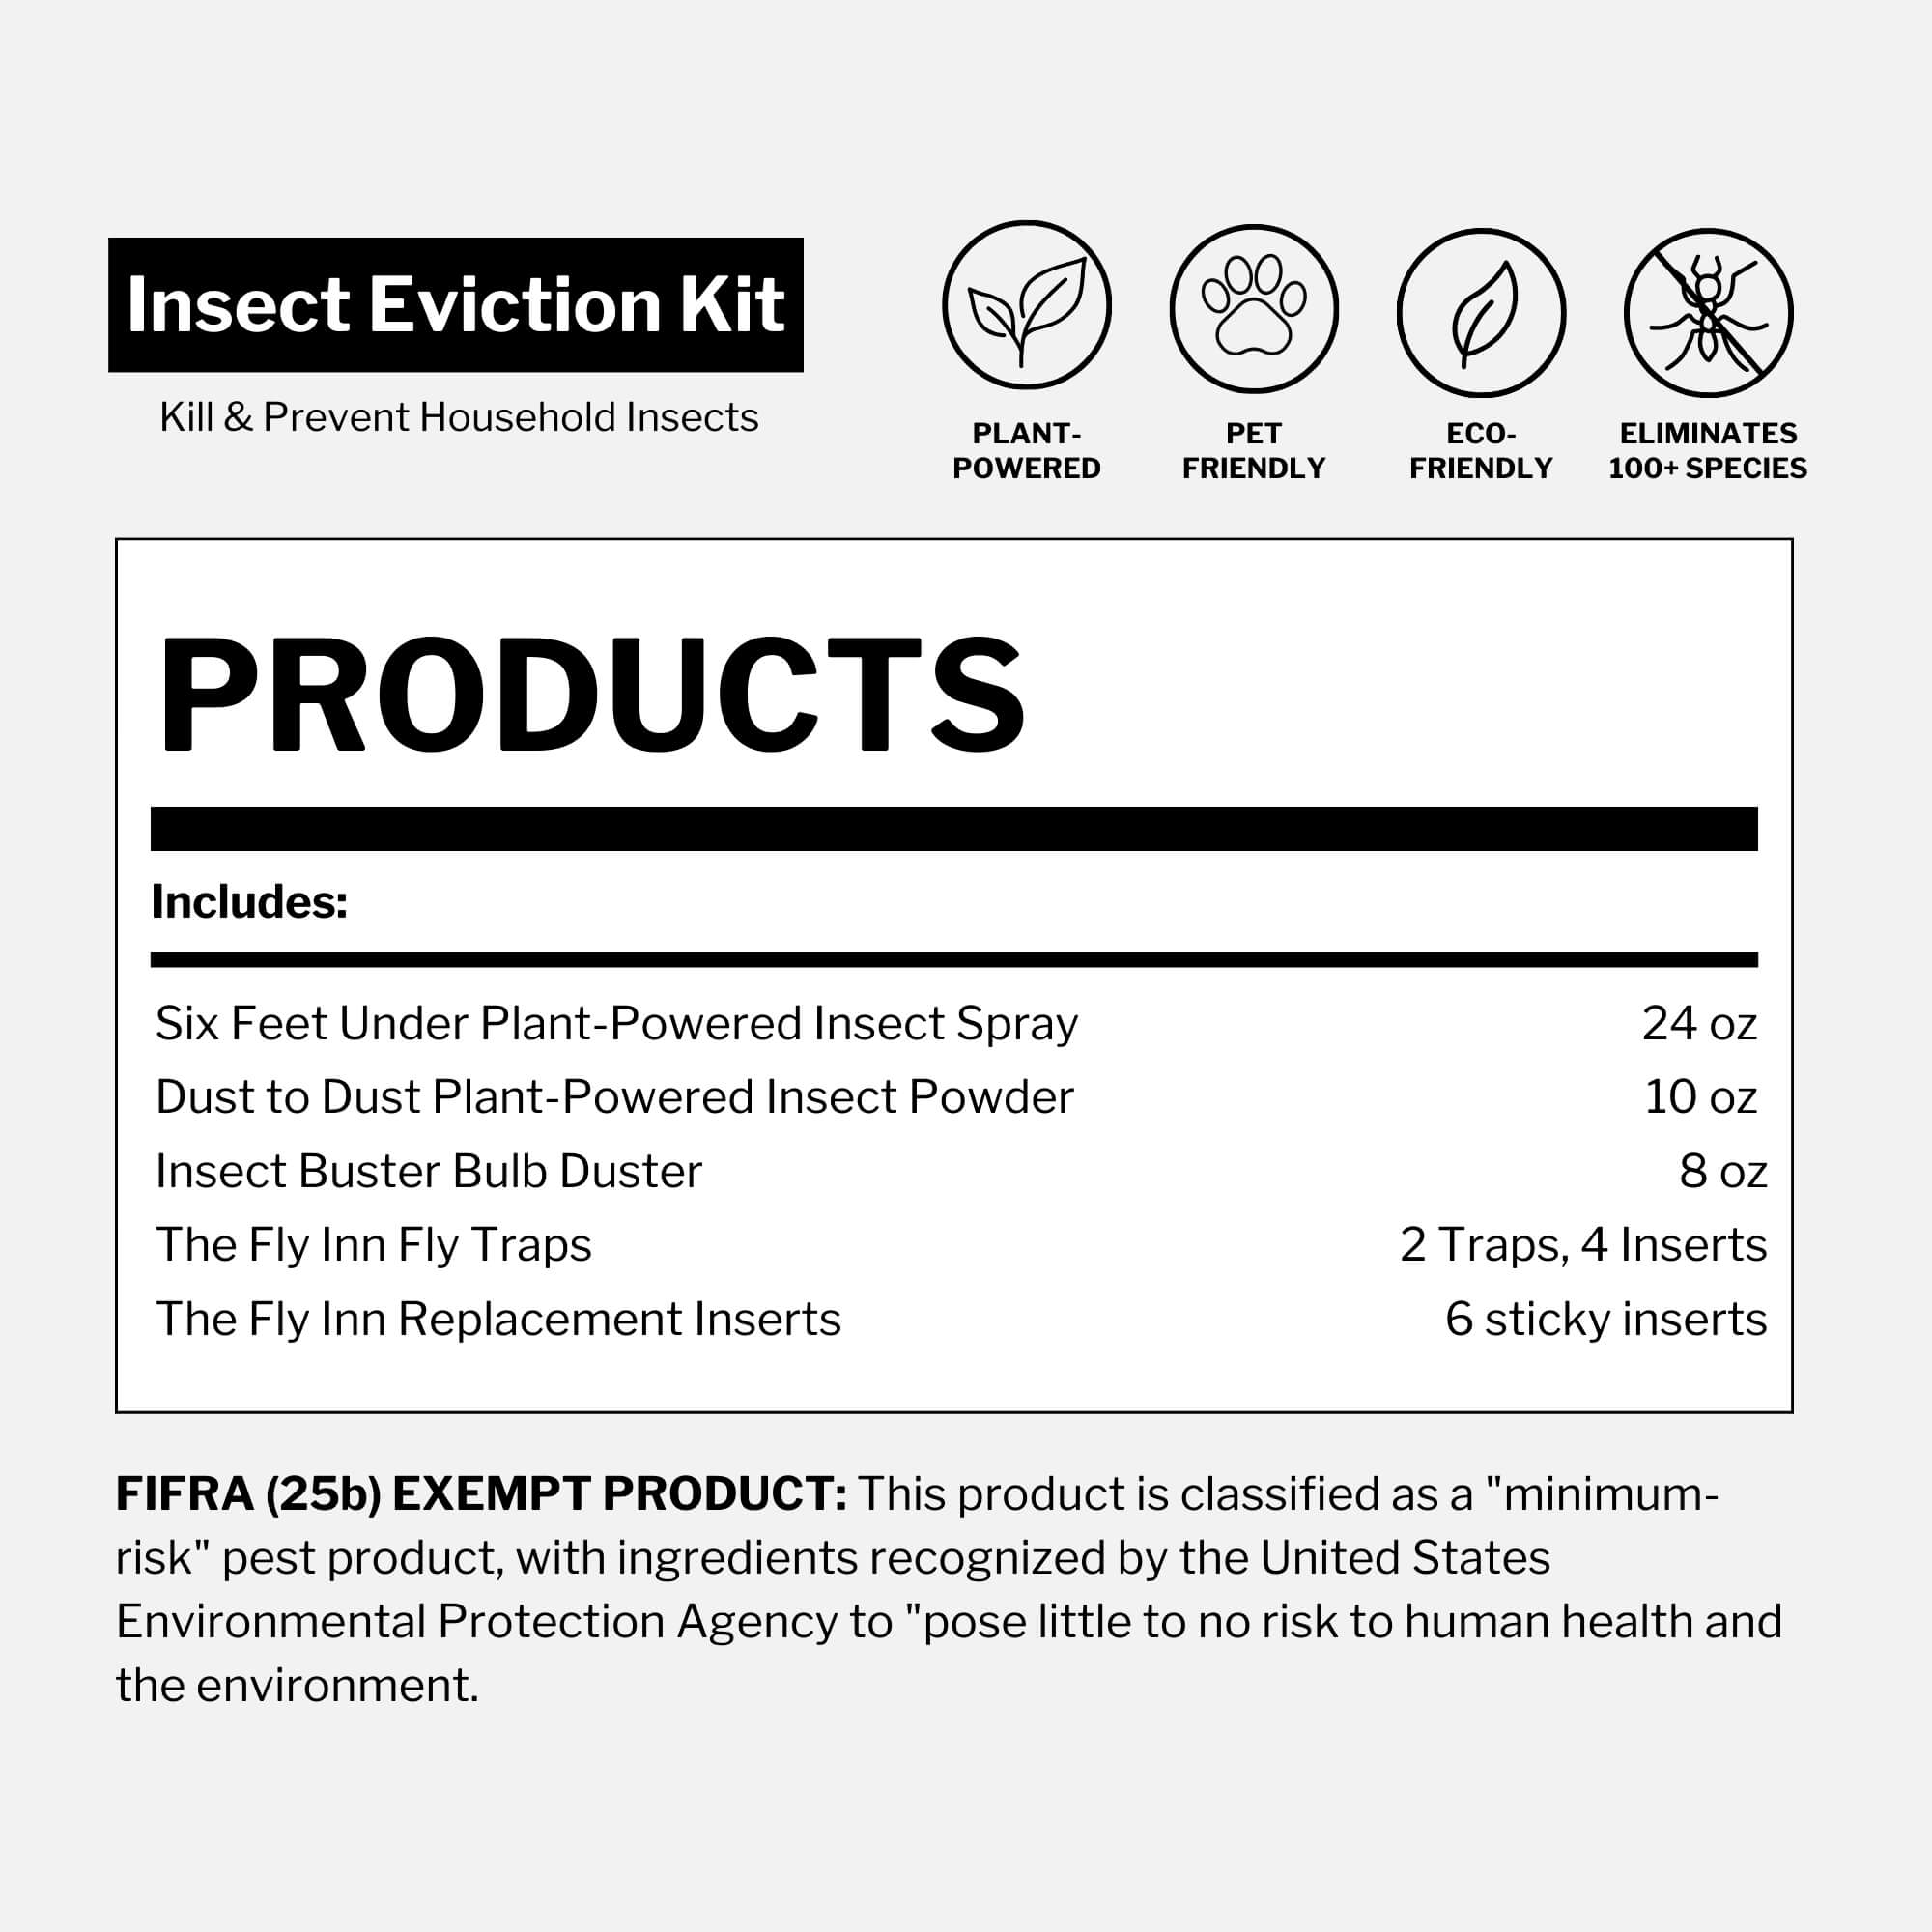 Insect Eviction Kit